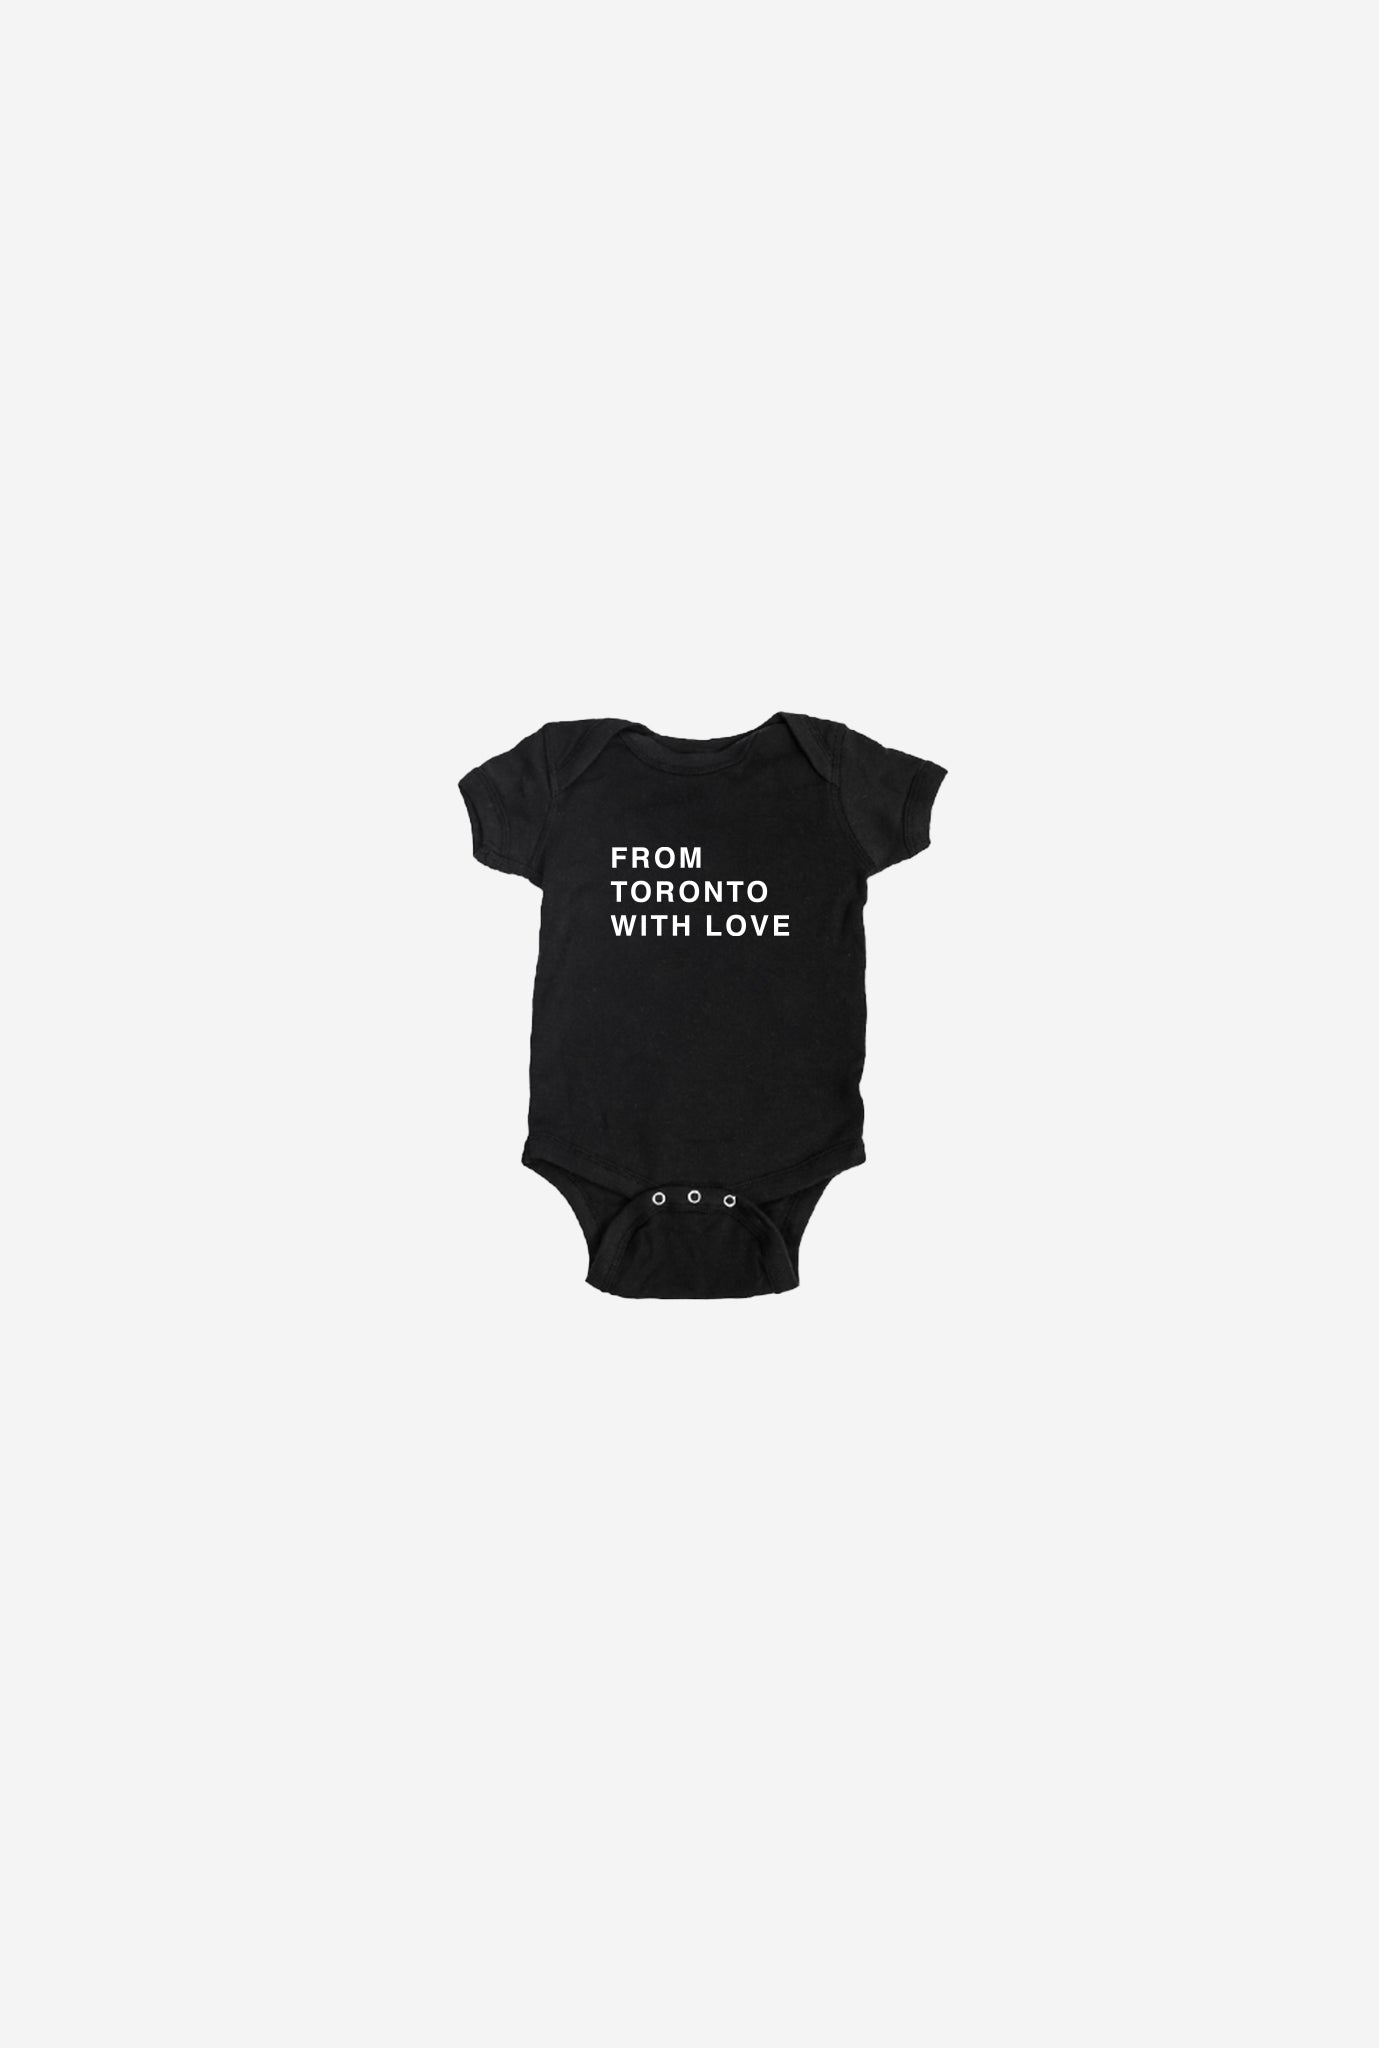 From Toronto with Love Short Sleeve Onesie - Black